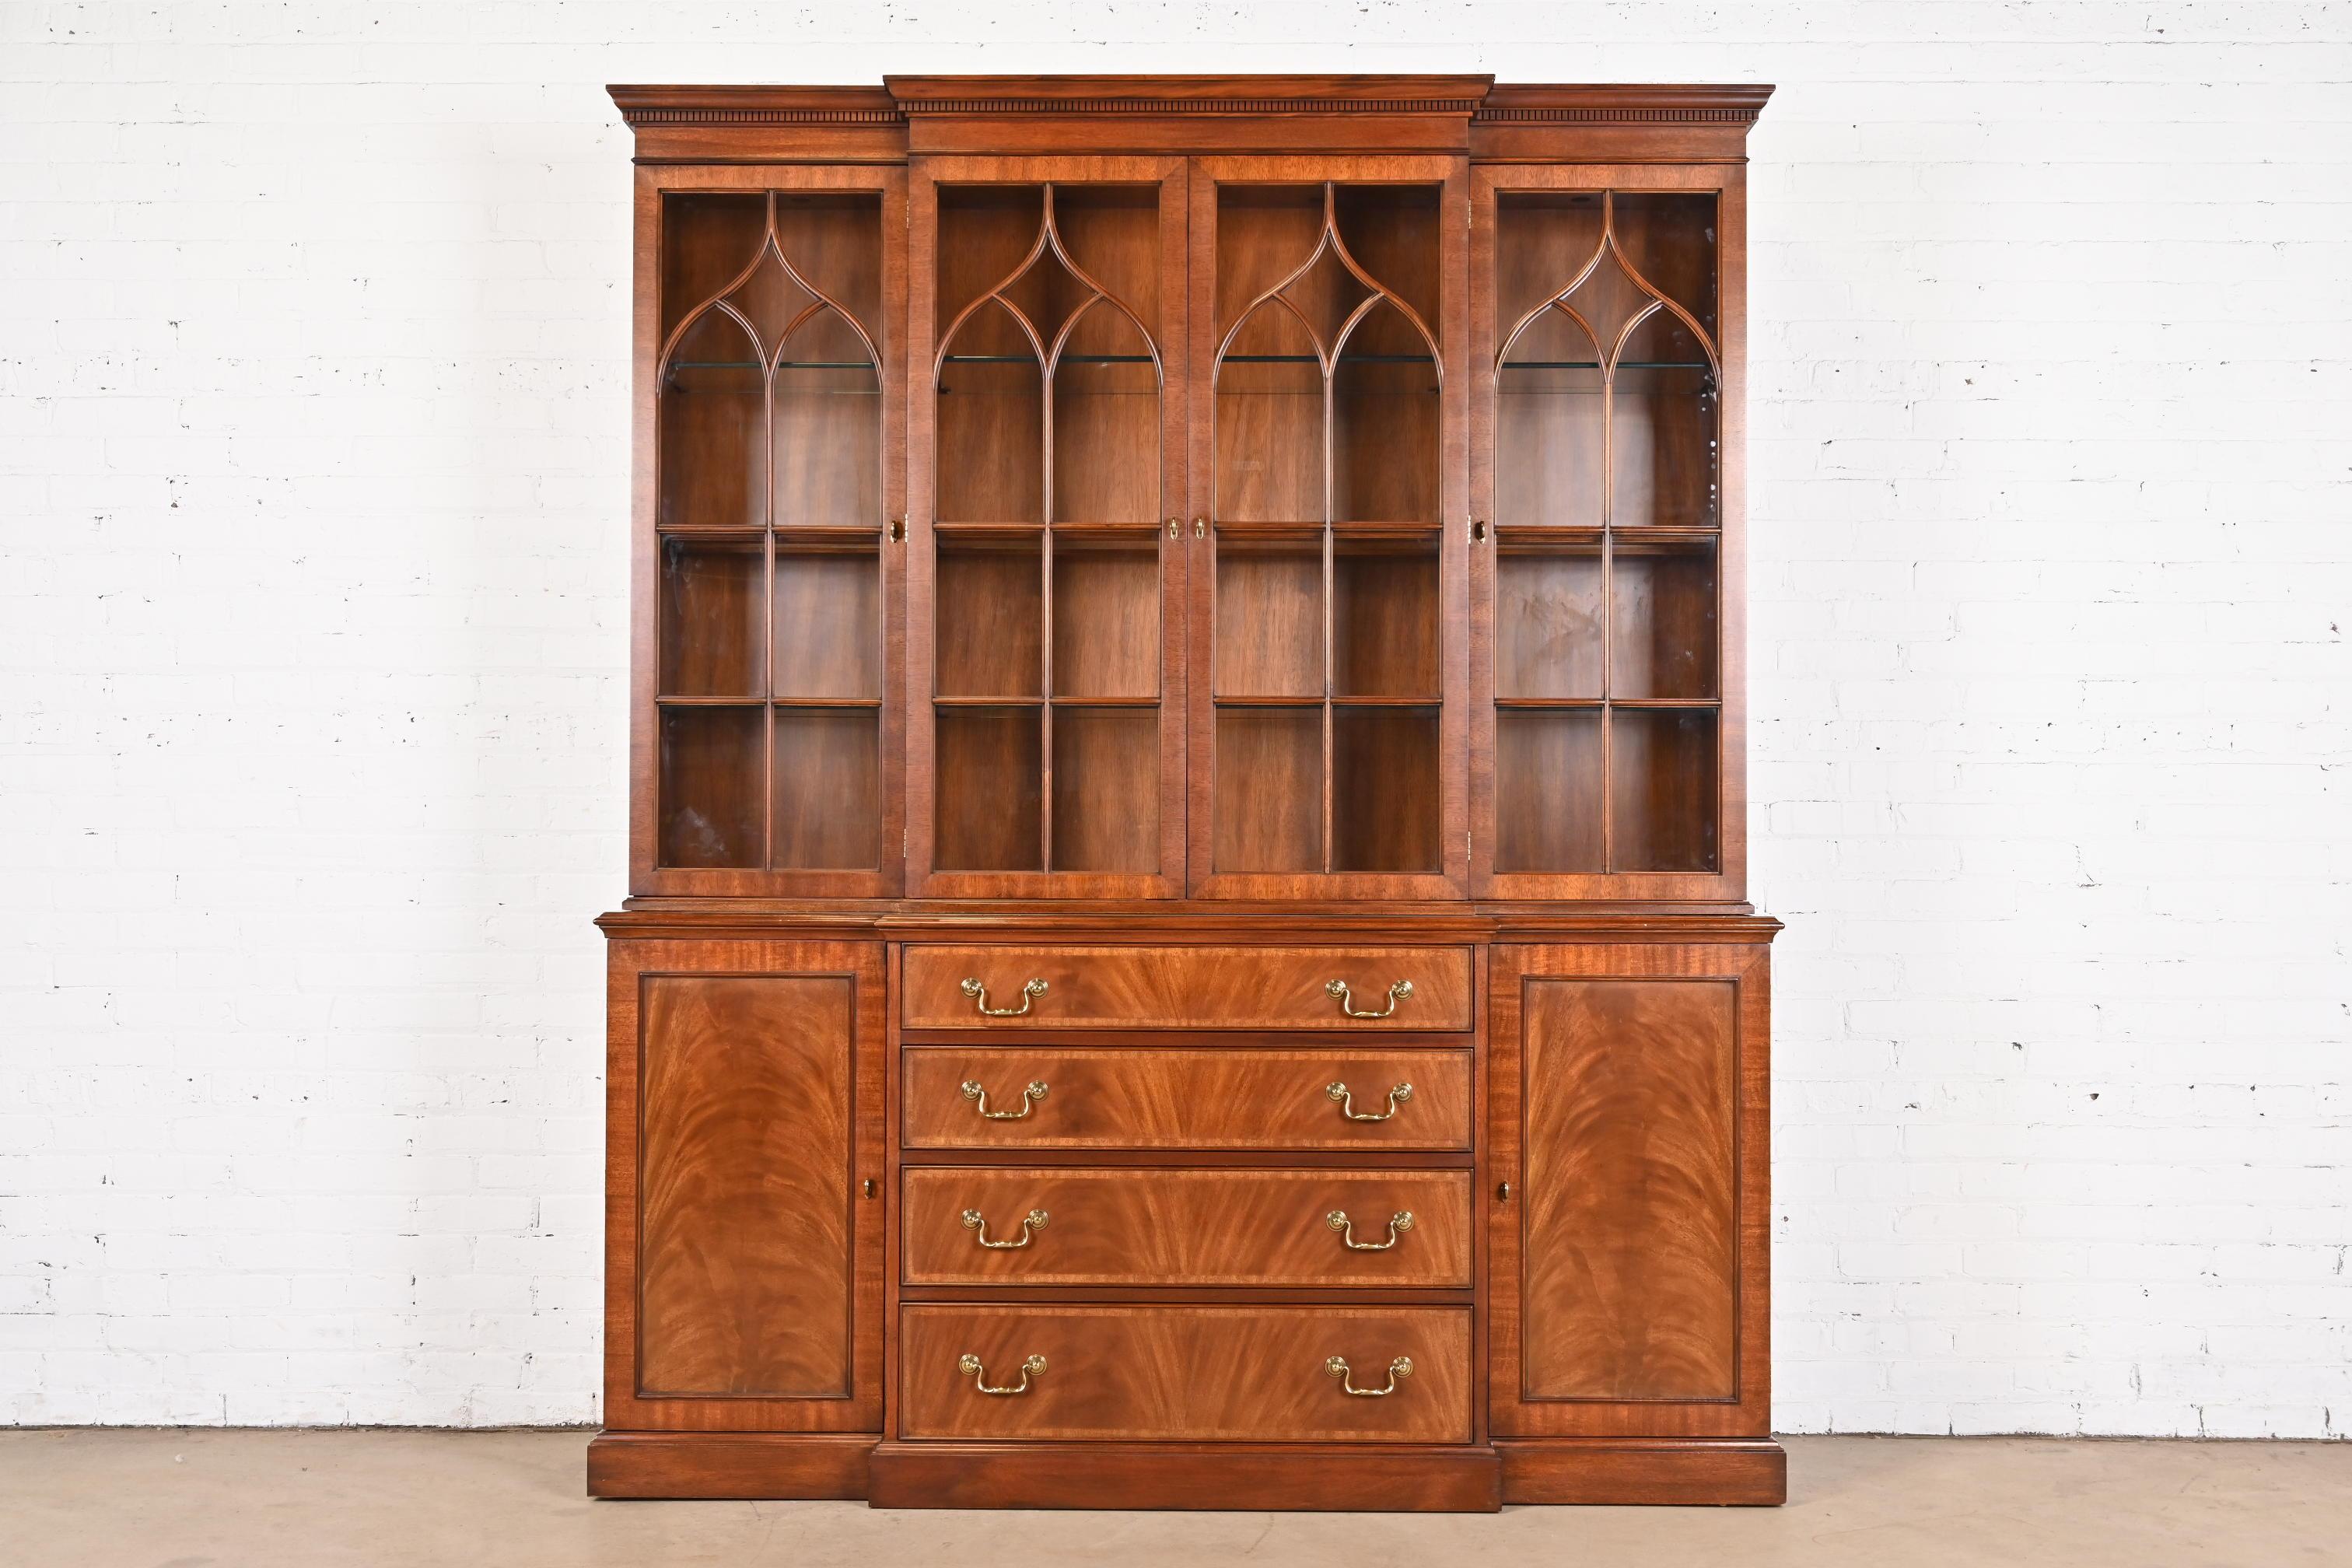 A gorgeous Georgian or Chippendale style lighted breakfront bookcase or dining cabinet

By Henkel Harris

USA, 2004

Beautiful book-matched flame mahogany, with satinwood banding, mullioned glass front doors, glass shelves, and original brass